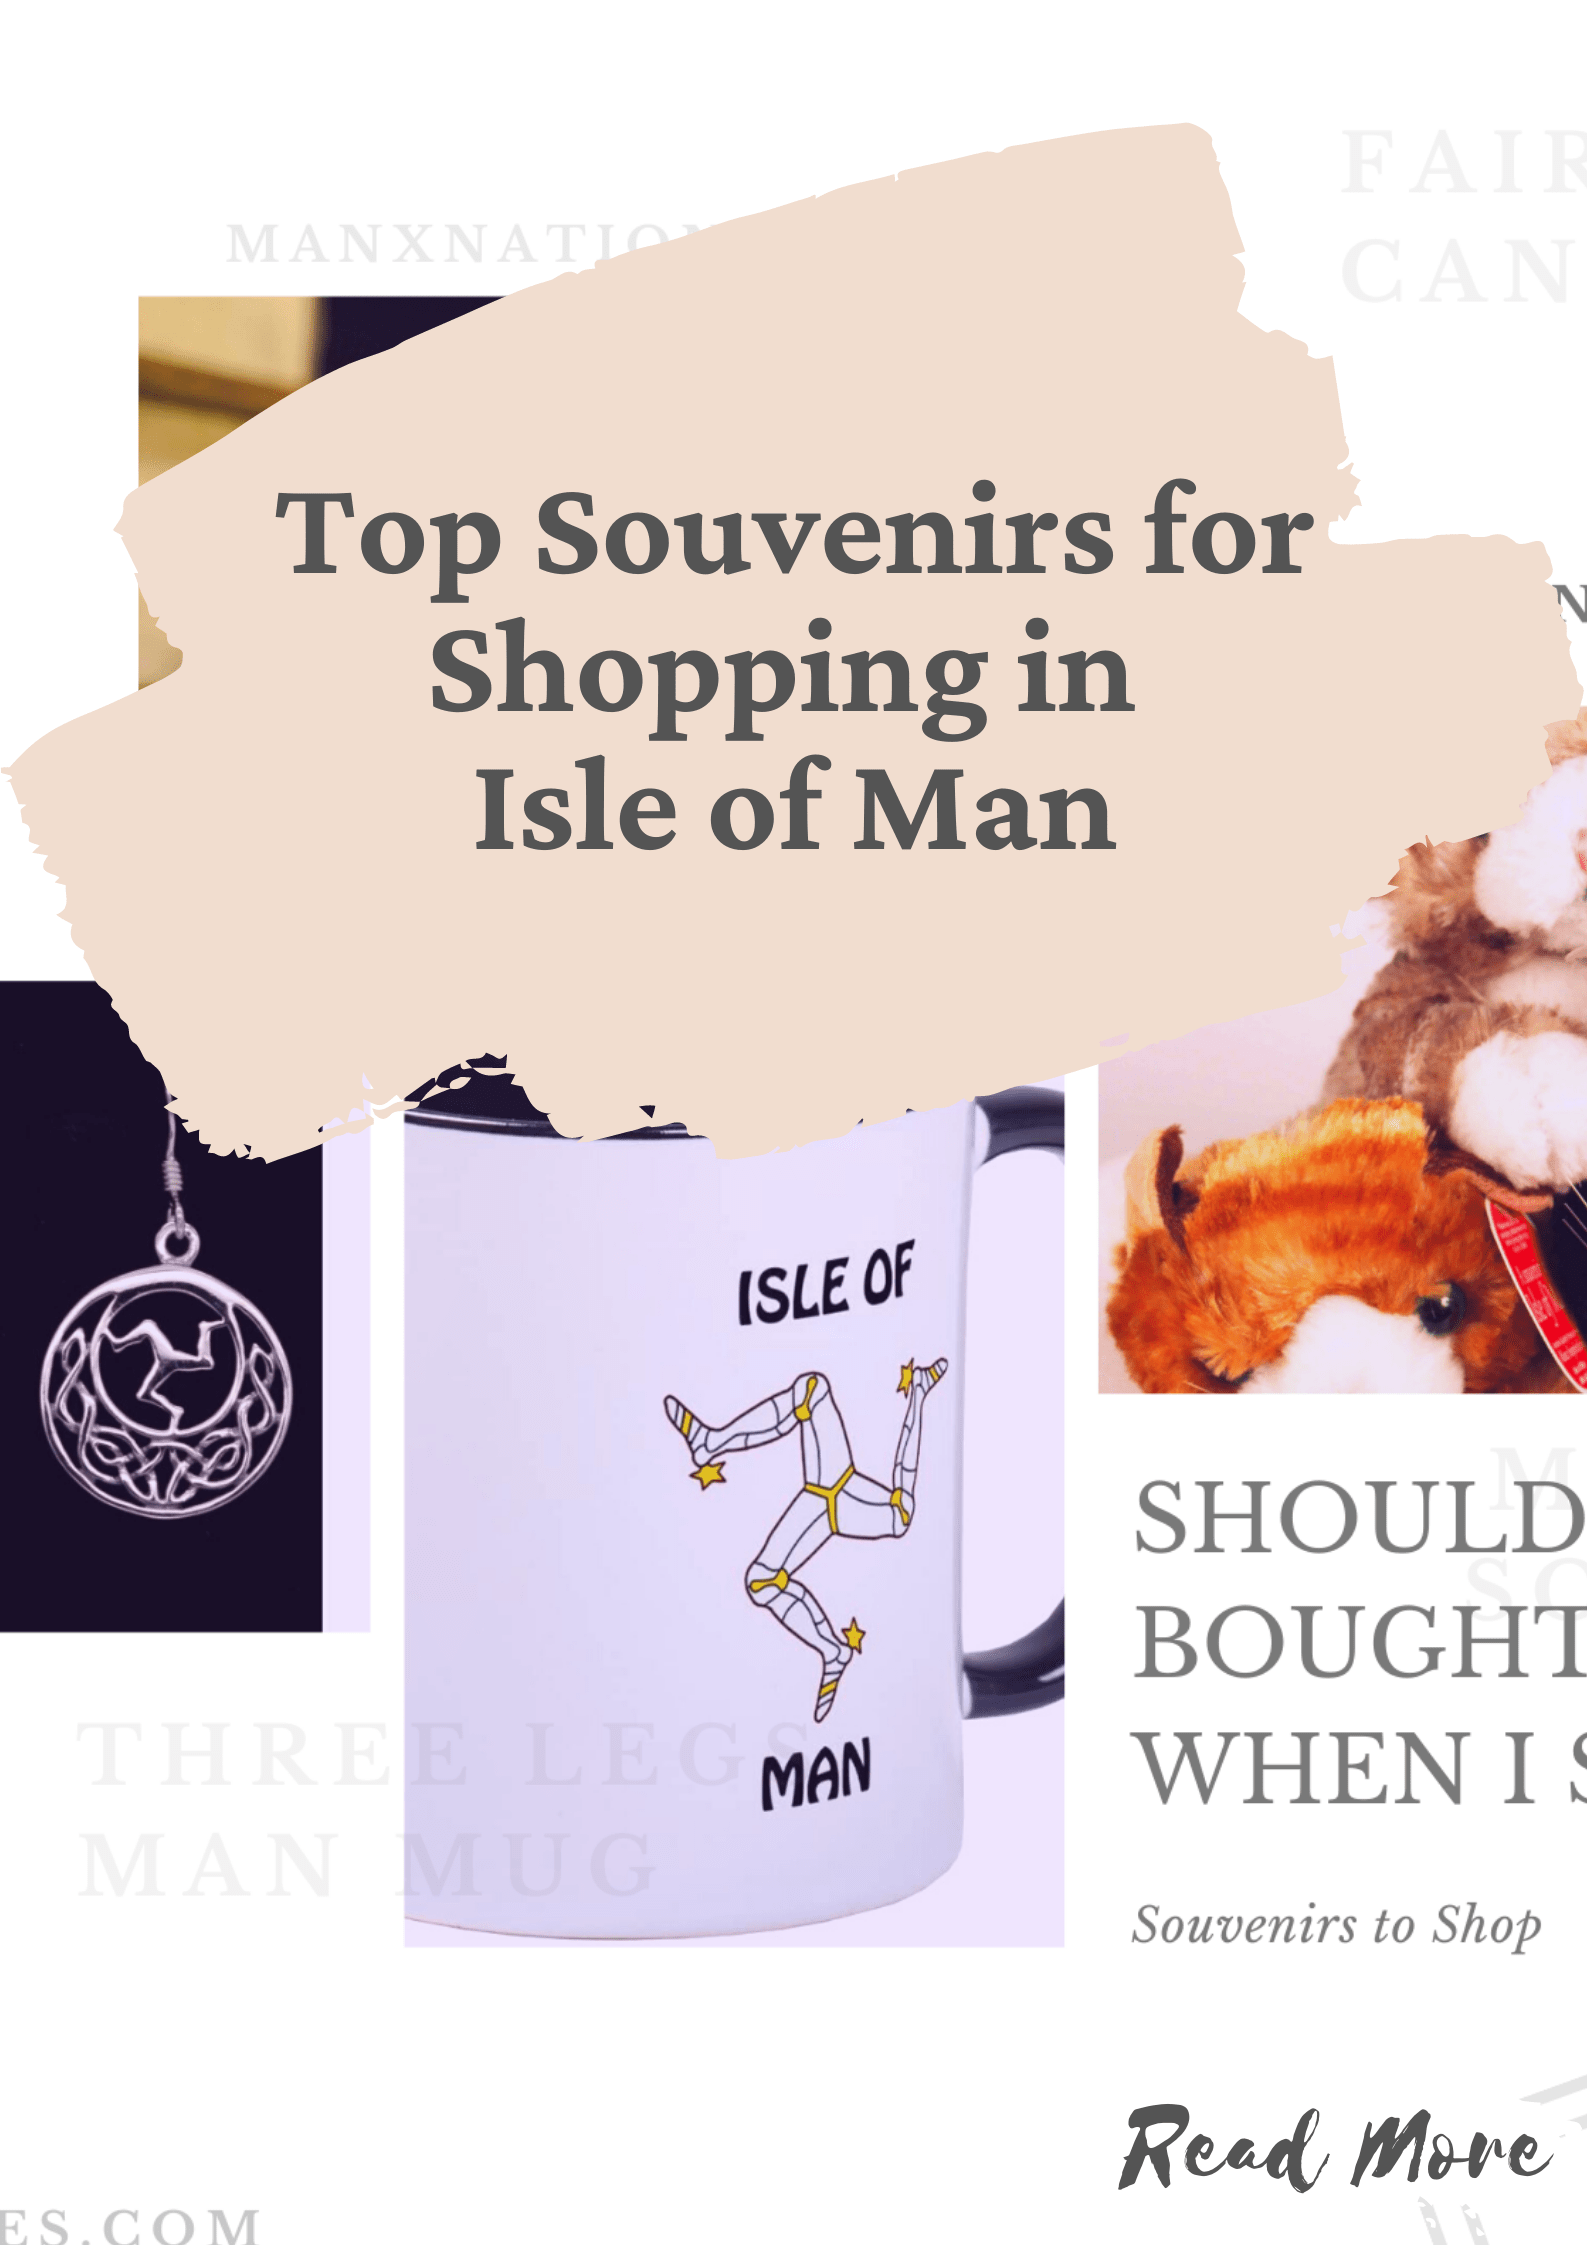 Top Souvenirs for Shopping in Isle of Man